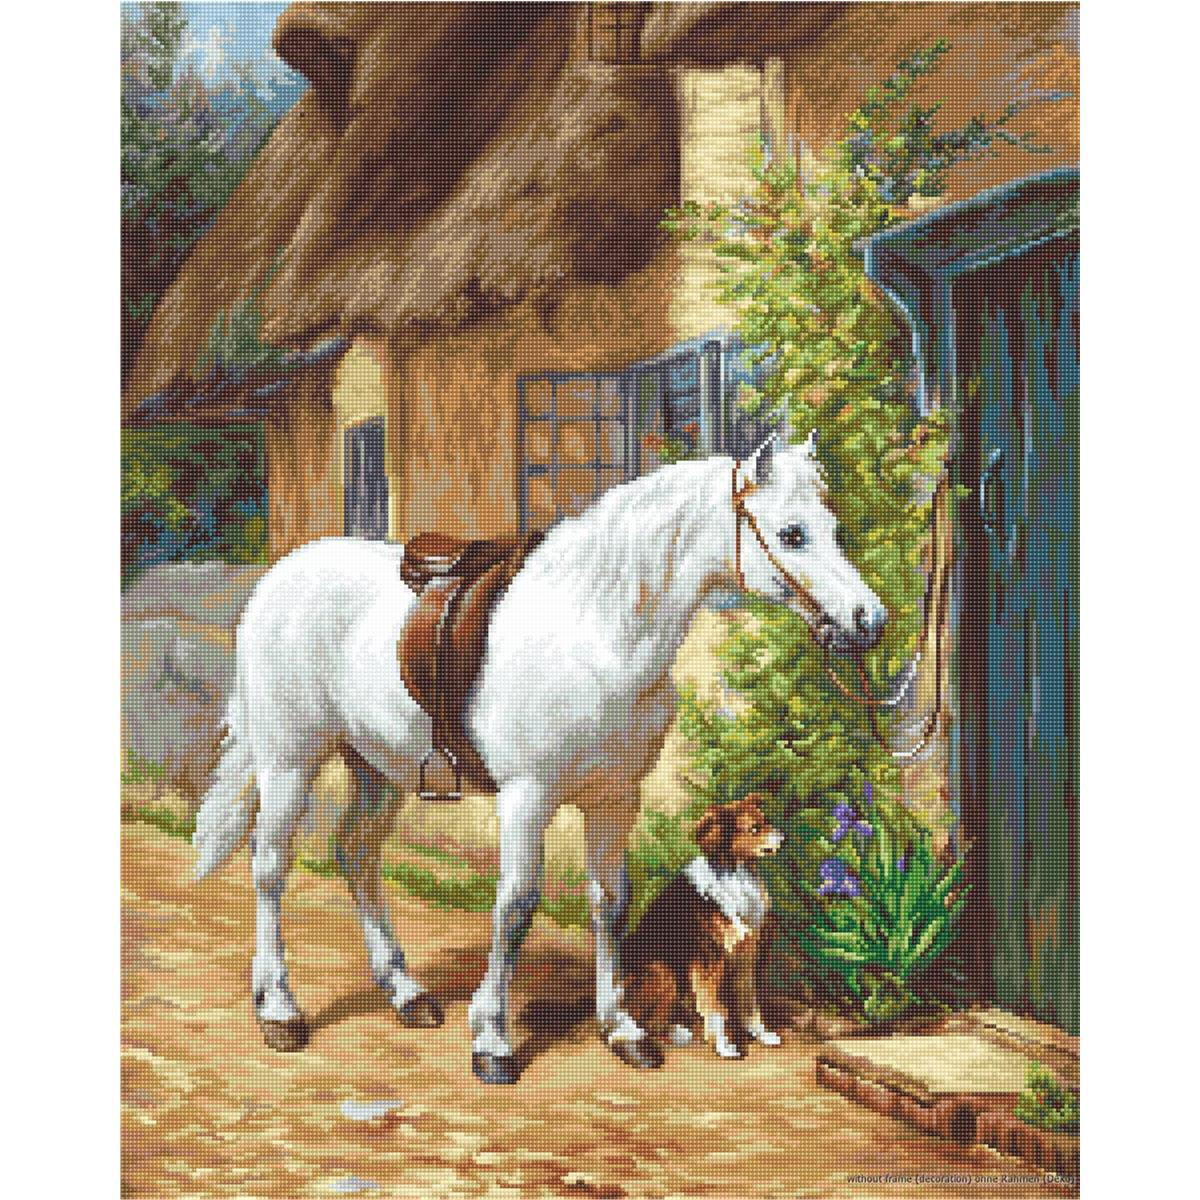 A white horse with a saddle stands next to a small collie...